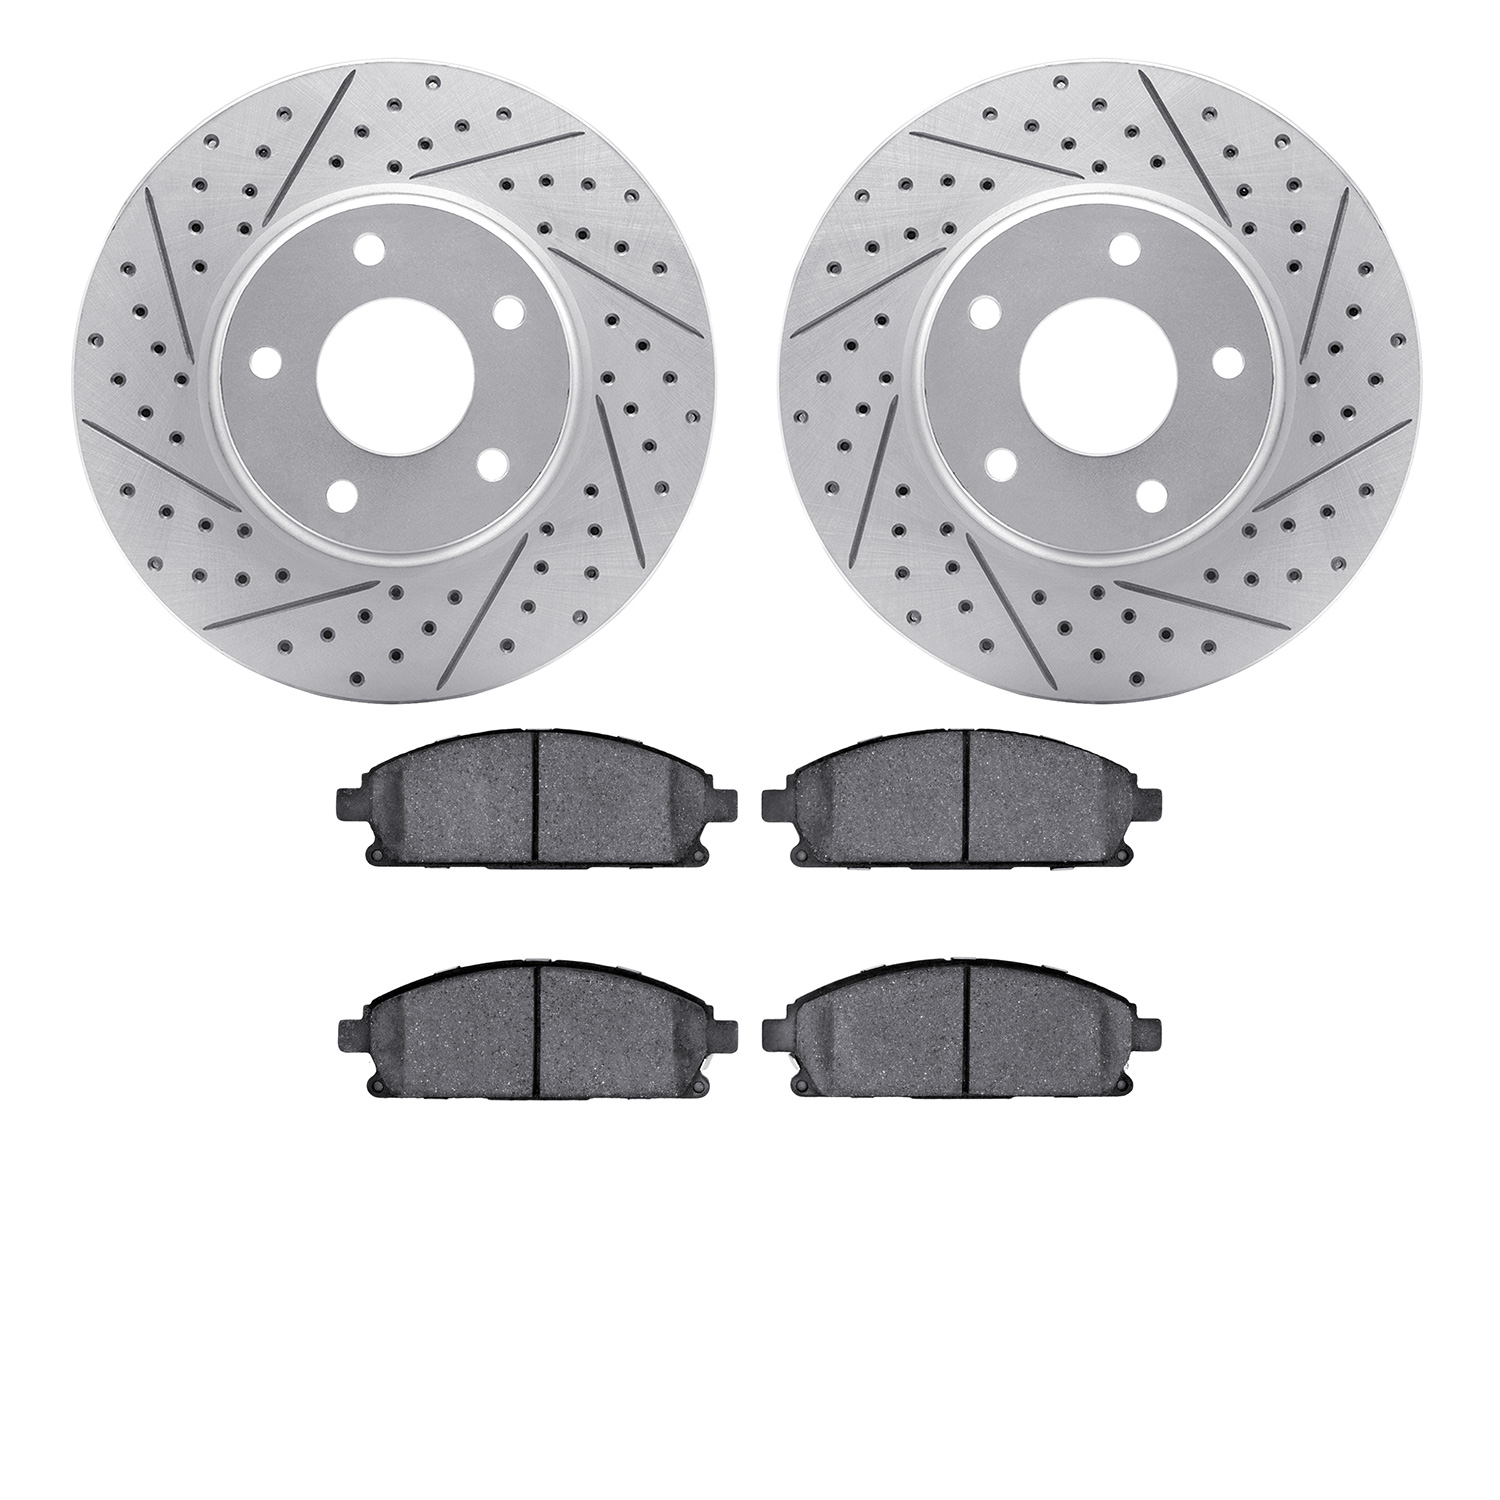 2502-67046 Geoperformance Drilled/Slotted Rotors w/5000 Advanced Brake Pads Kit, 2004-2017 Infiniti/Nissan, Position: Front